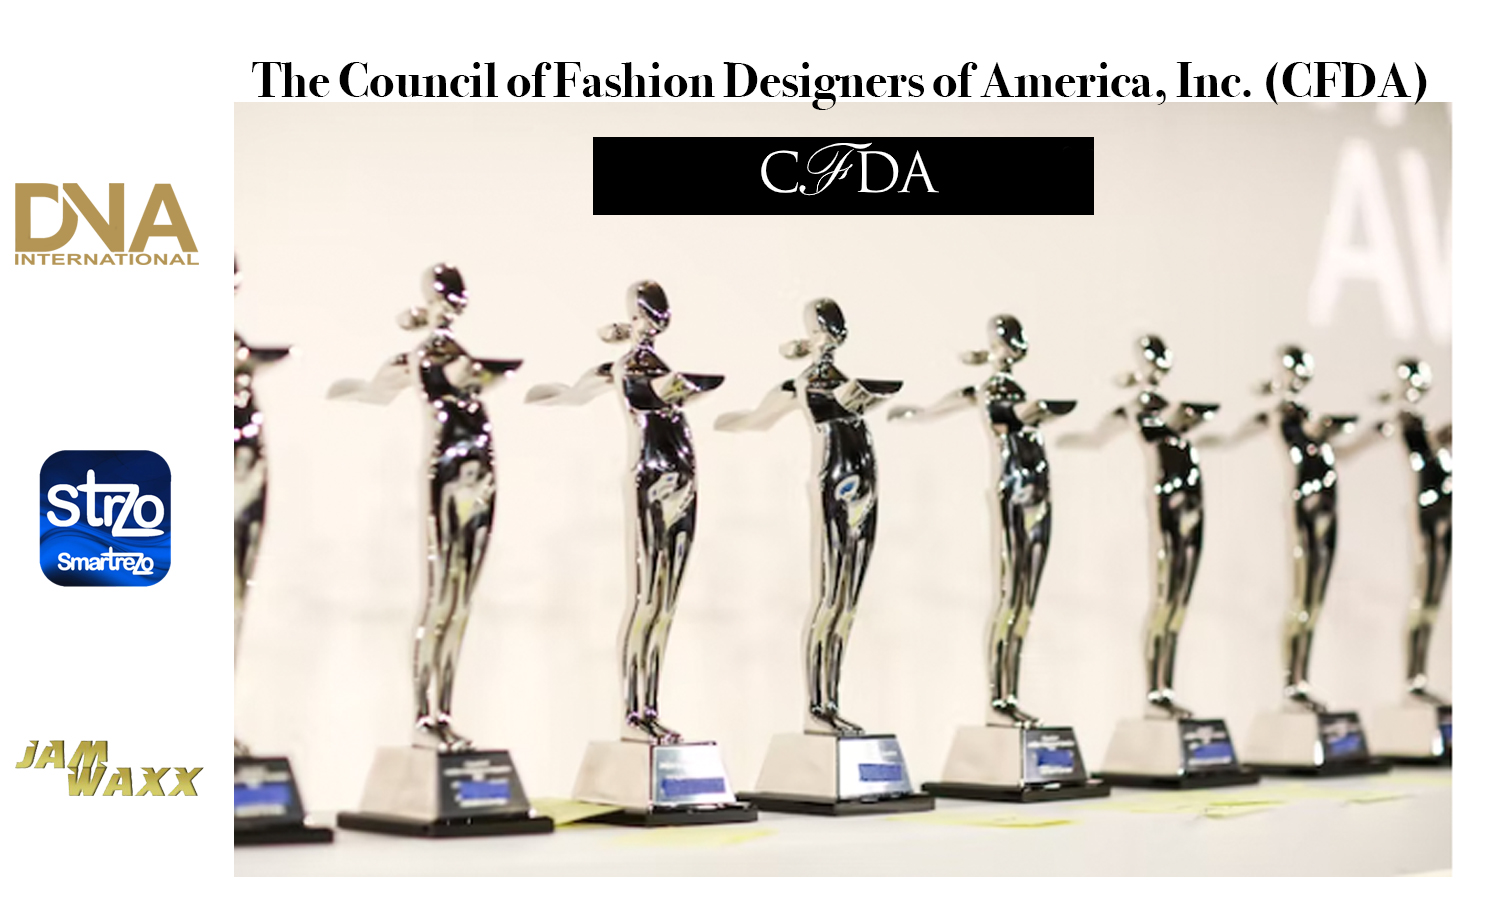 DN-AFRICA-The-Council-of-Fashion-Designers-of-America,-Inc.-(CFDA--DN-AFRICA--DN-A-INTERNATIONAL-MEDIA-PARTNER